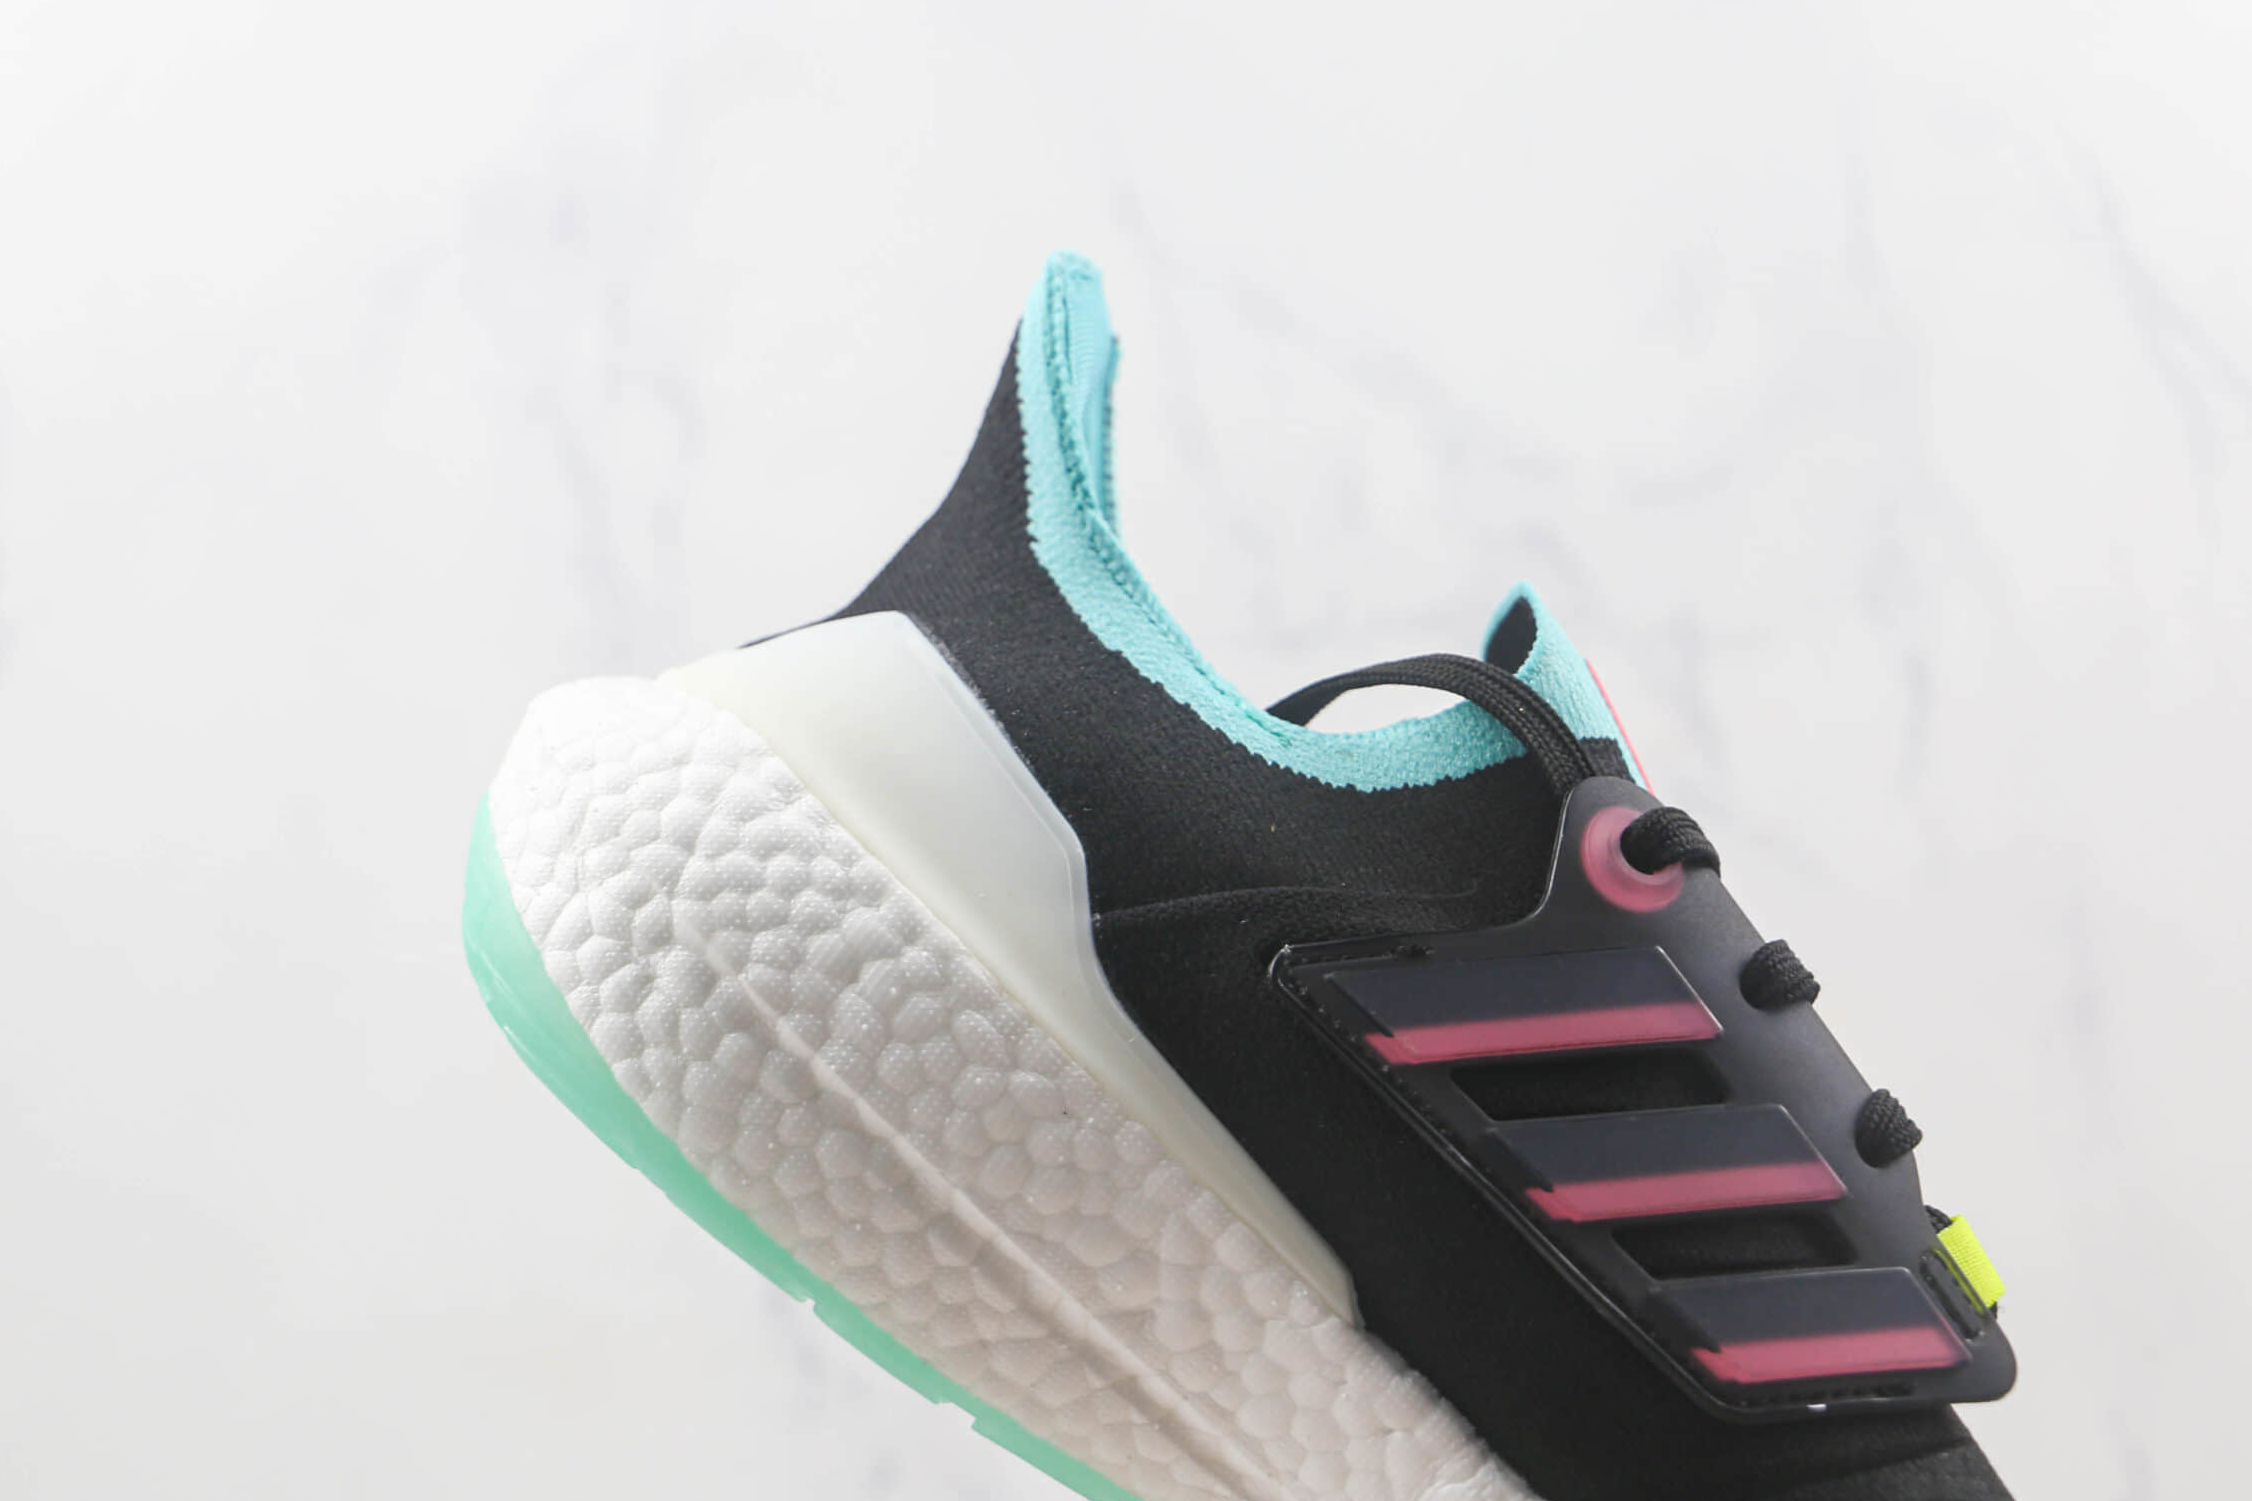 Adidas UltraBoost 22 J 'Black Turbo Mint' GY4516 - Stylish and Comfortable Kids Sneakers